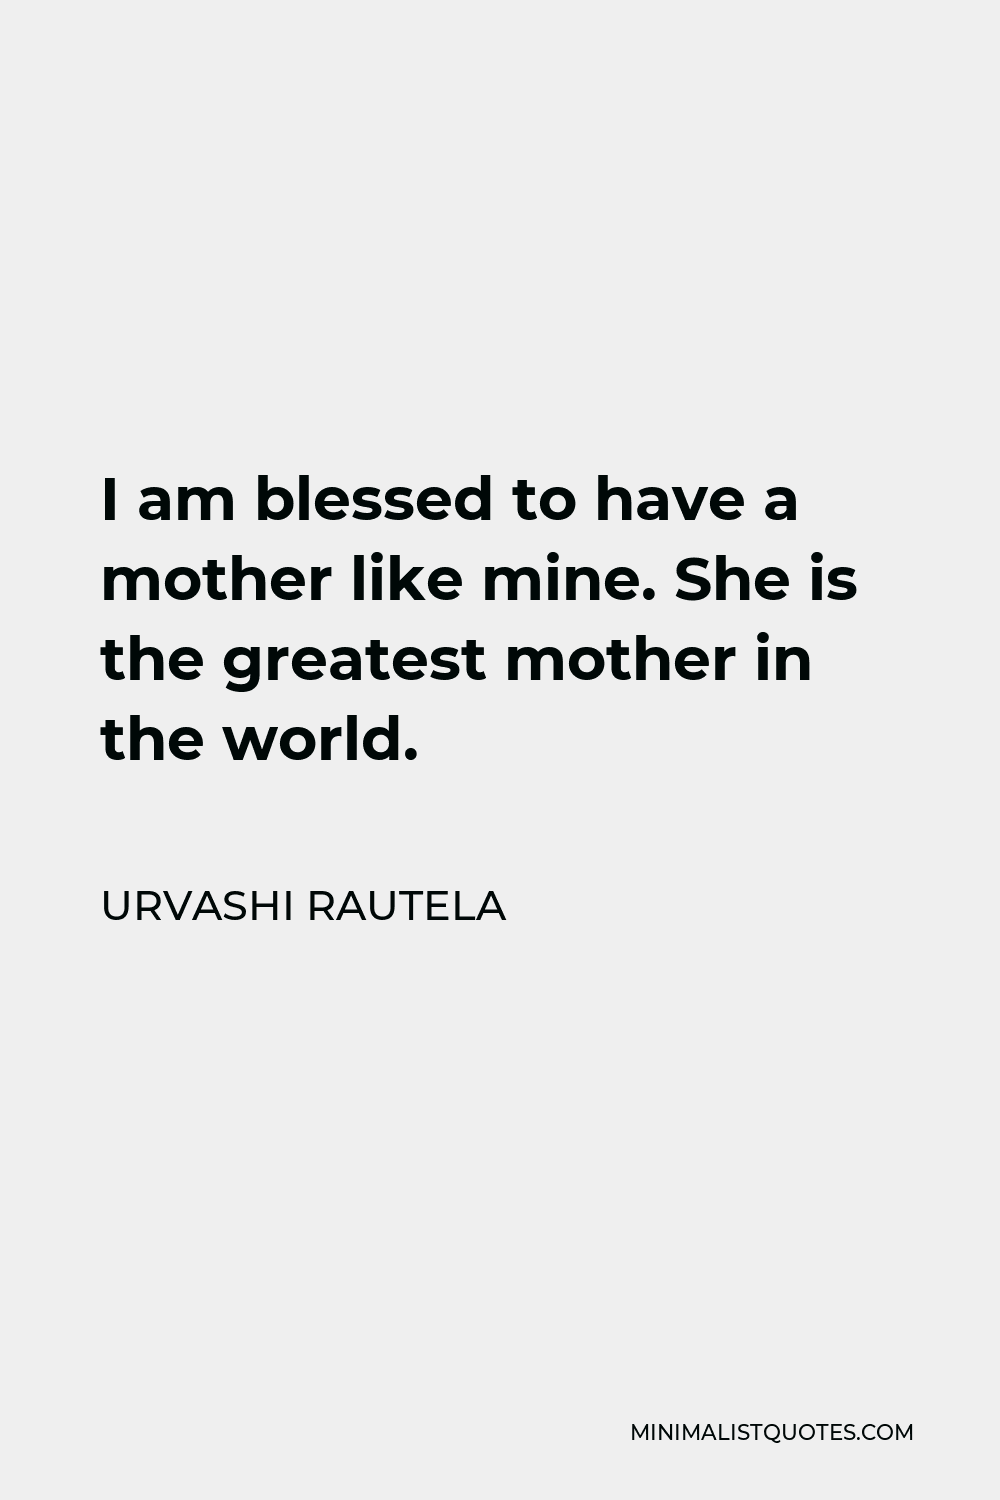 Urvashi Rautela Quote - I am blessed to have a mother like mine. She is the greatest mother in the world.